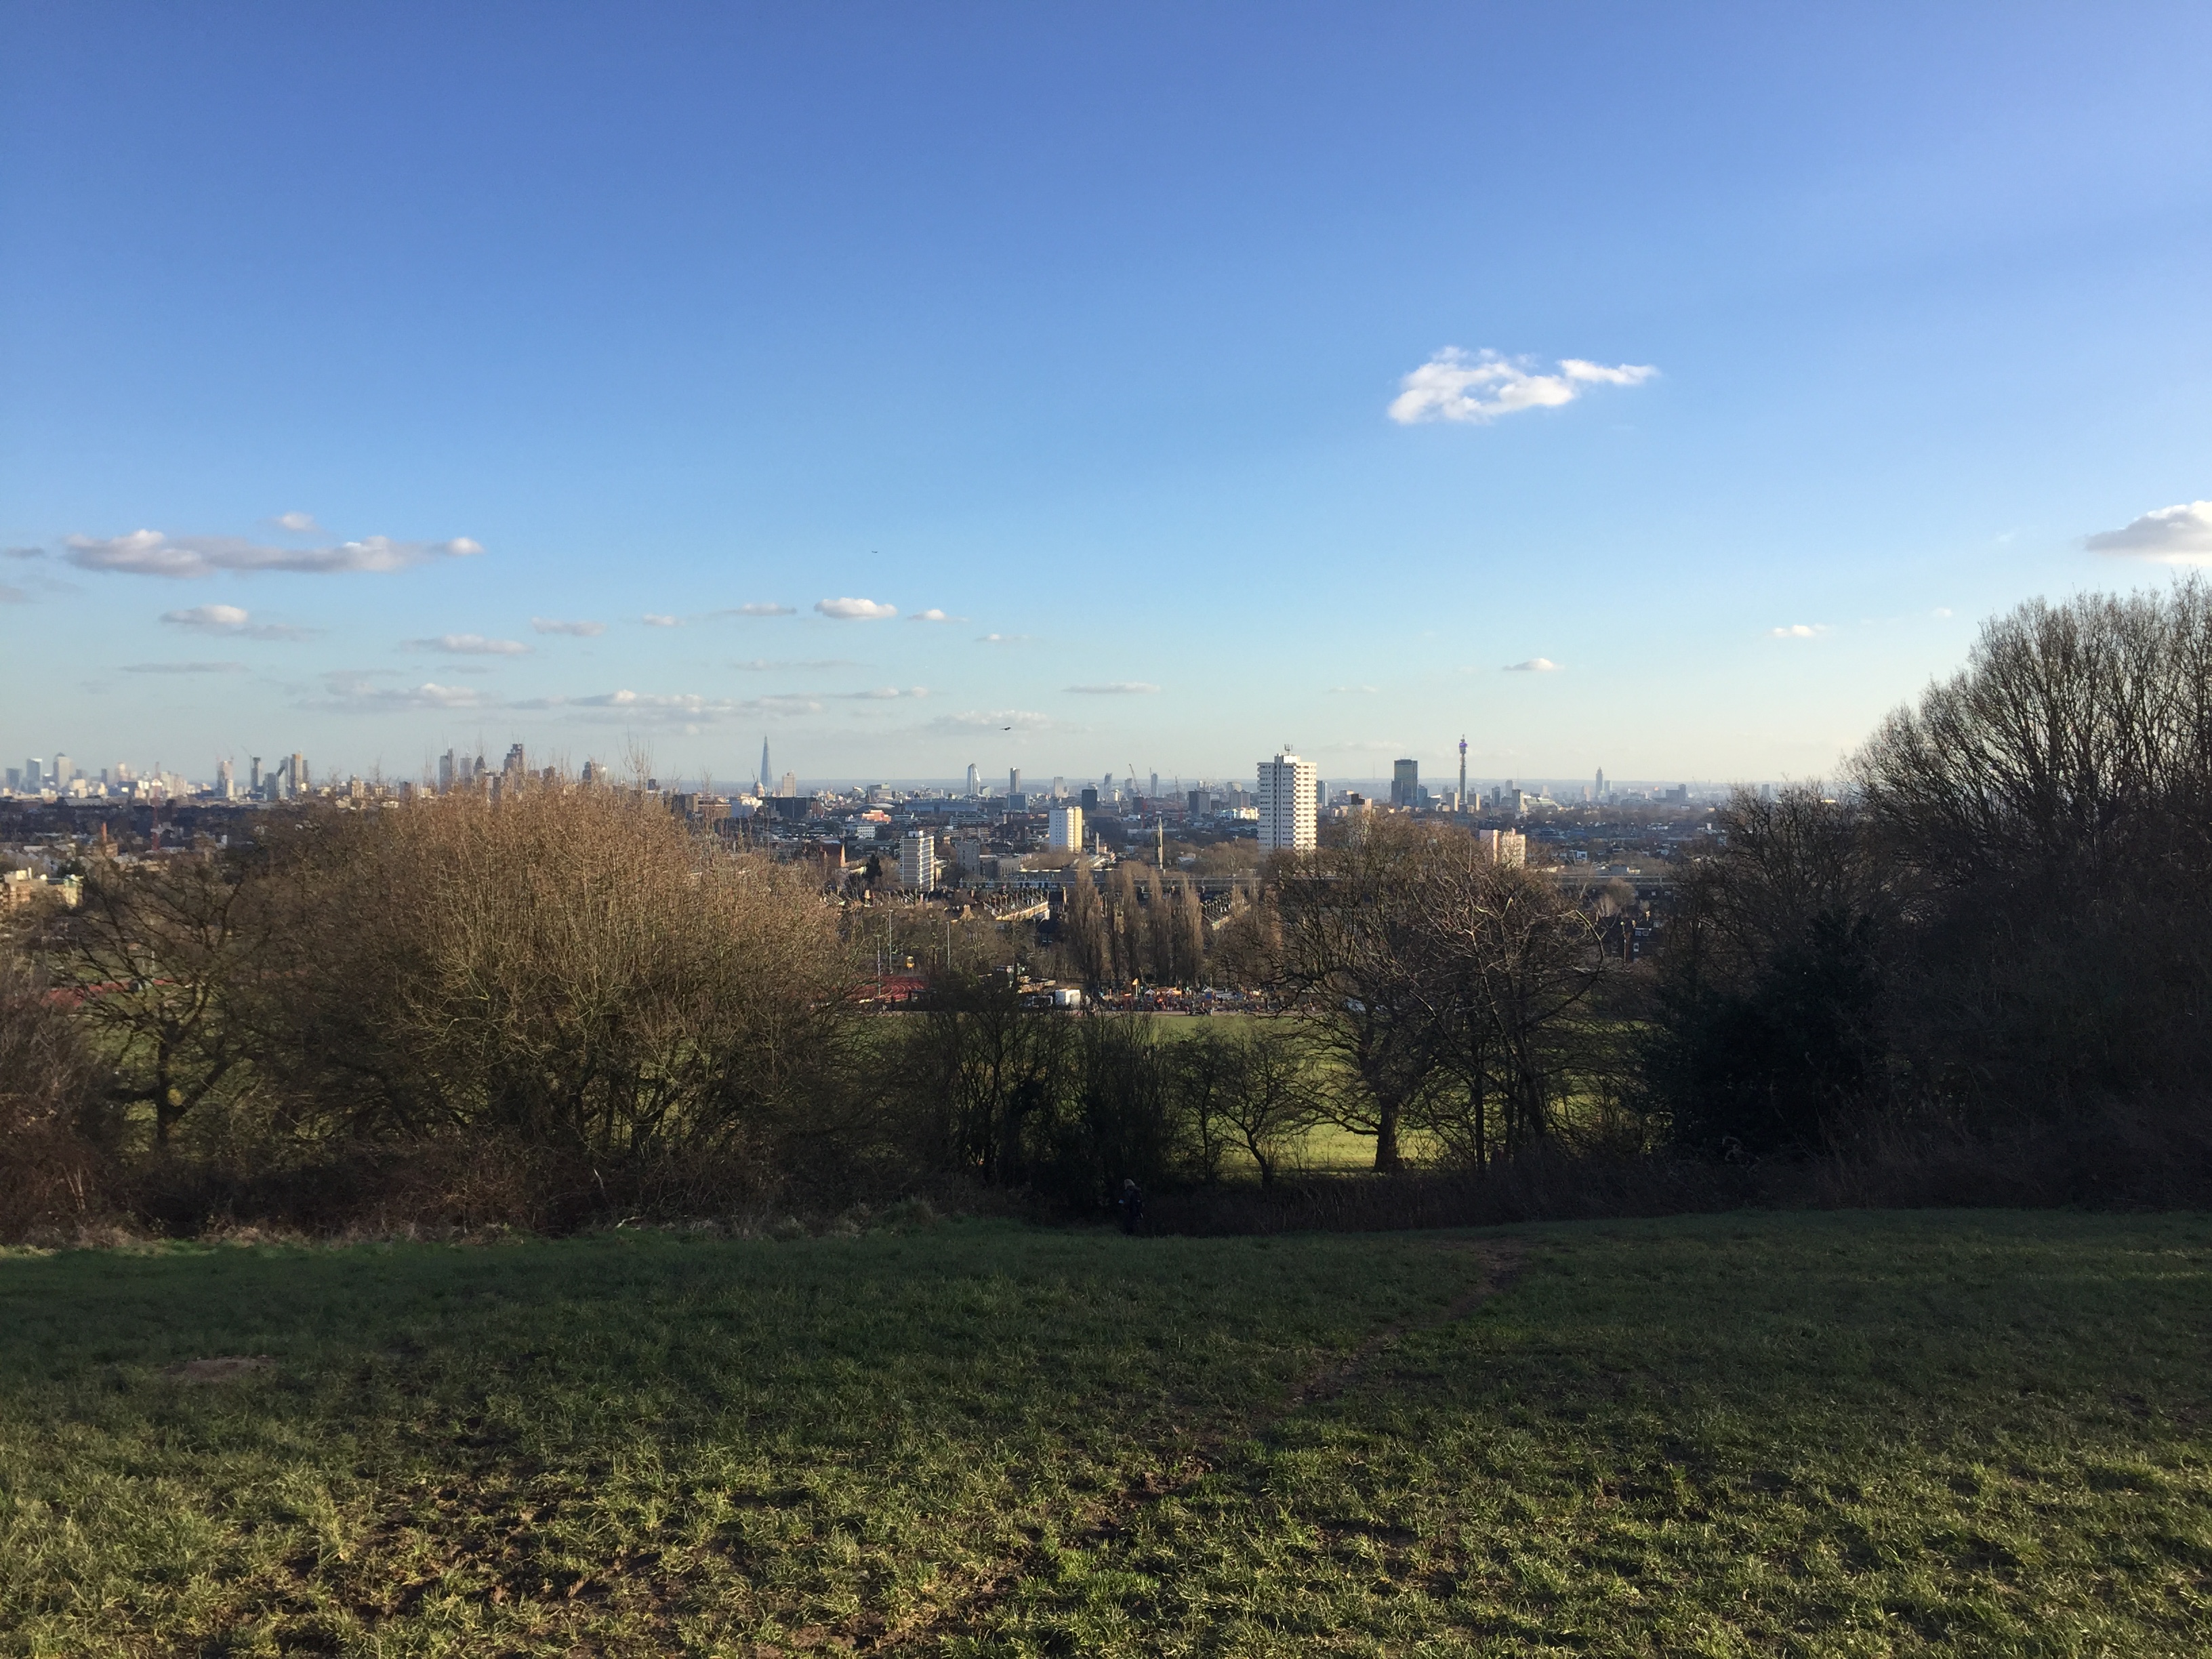 View of the London skyline from Parliament Hill in Hampstead Heath, beneath a blue sky with just a couple of wispy white clouds. In the far distance it's possible to make out the BT tower on the right, and the Shard just left of centre.